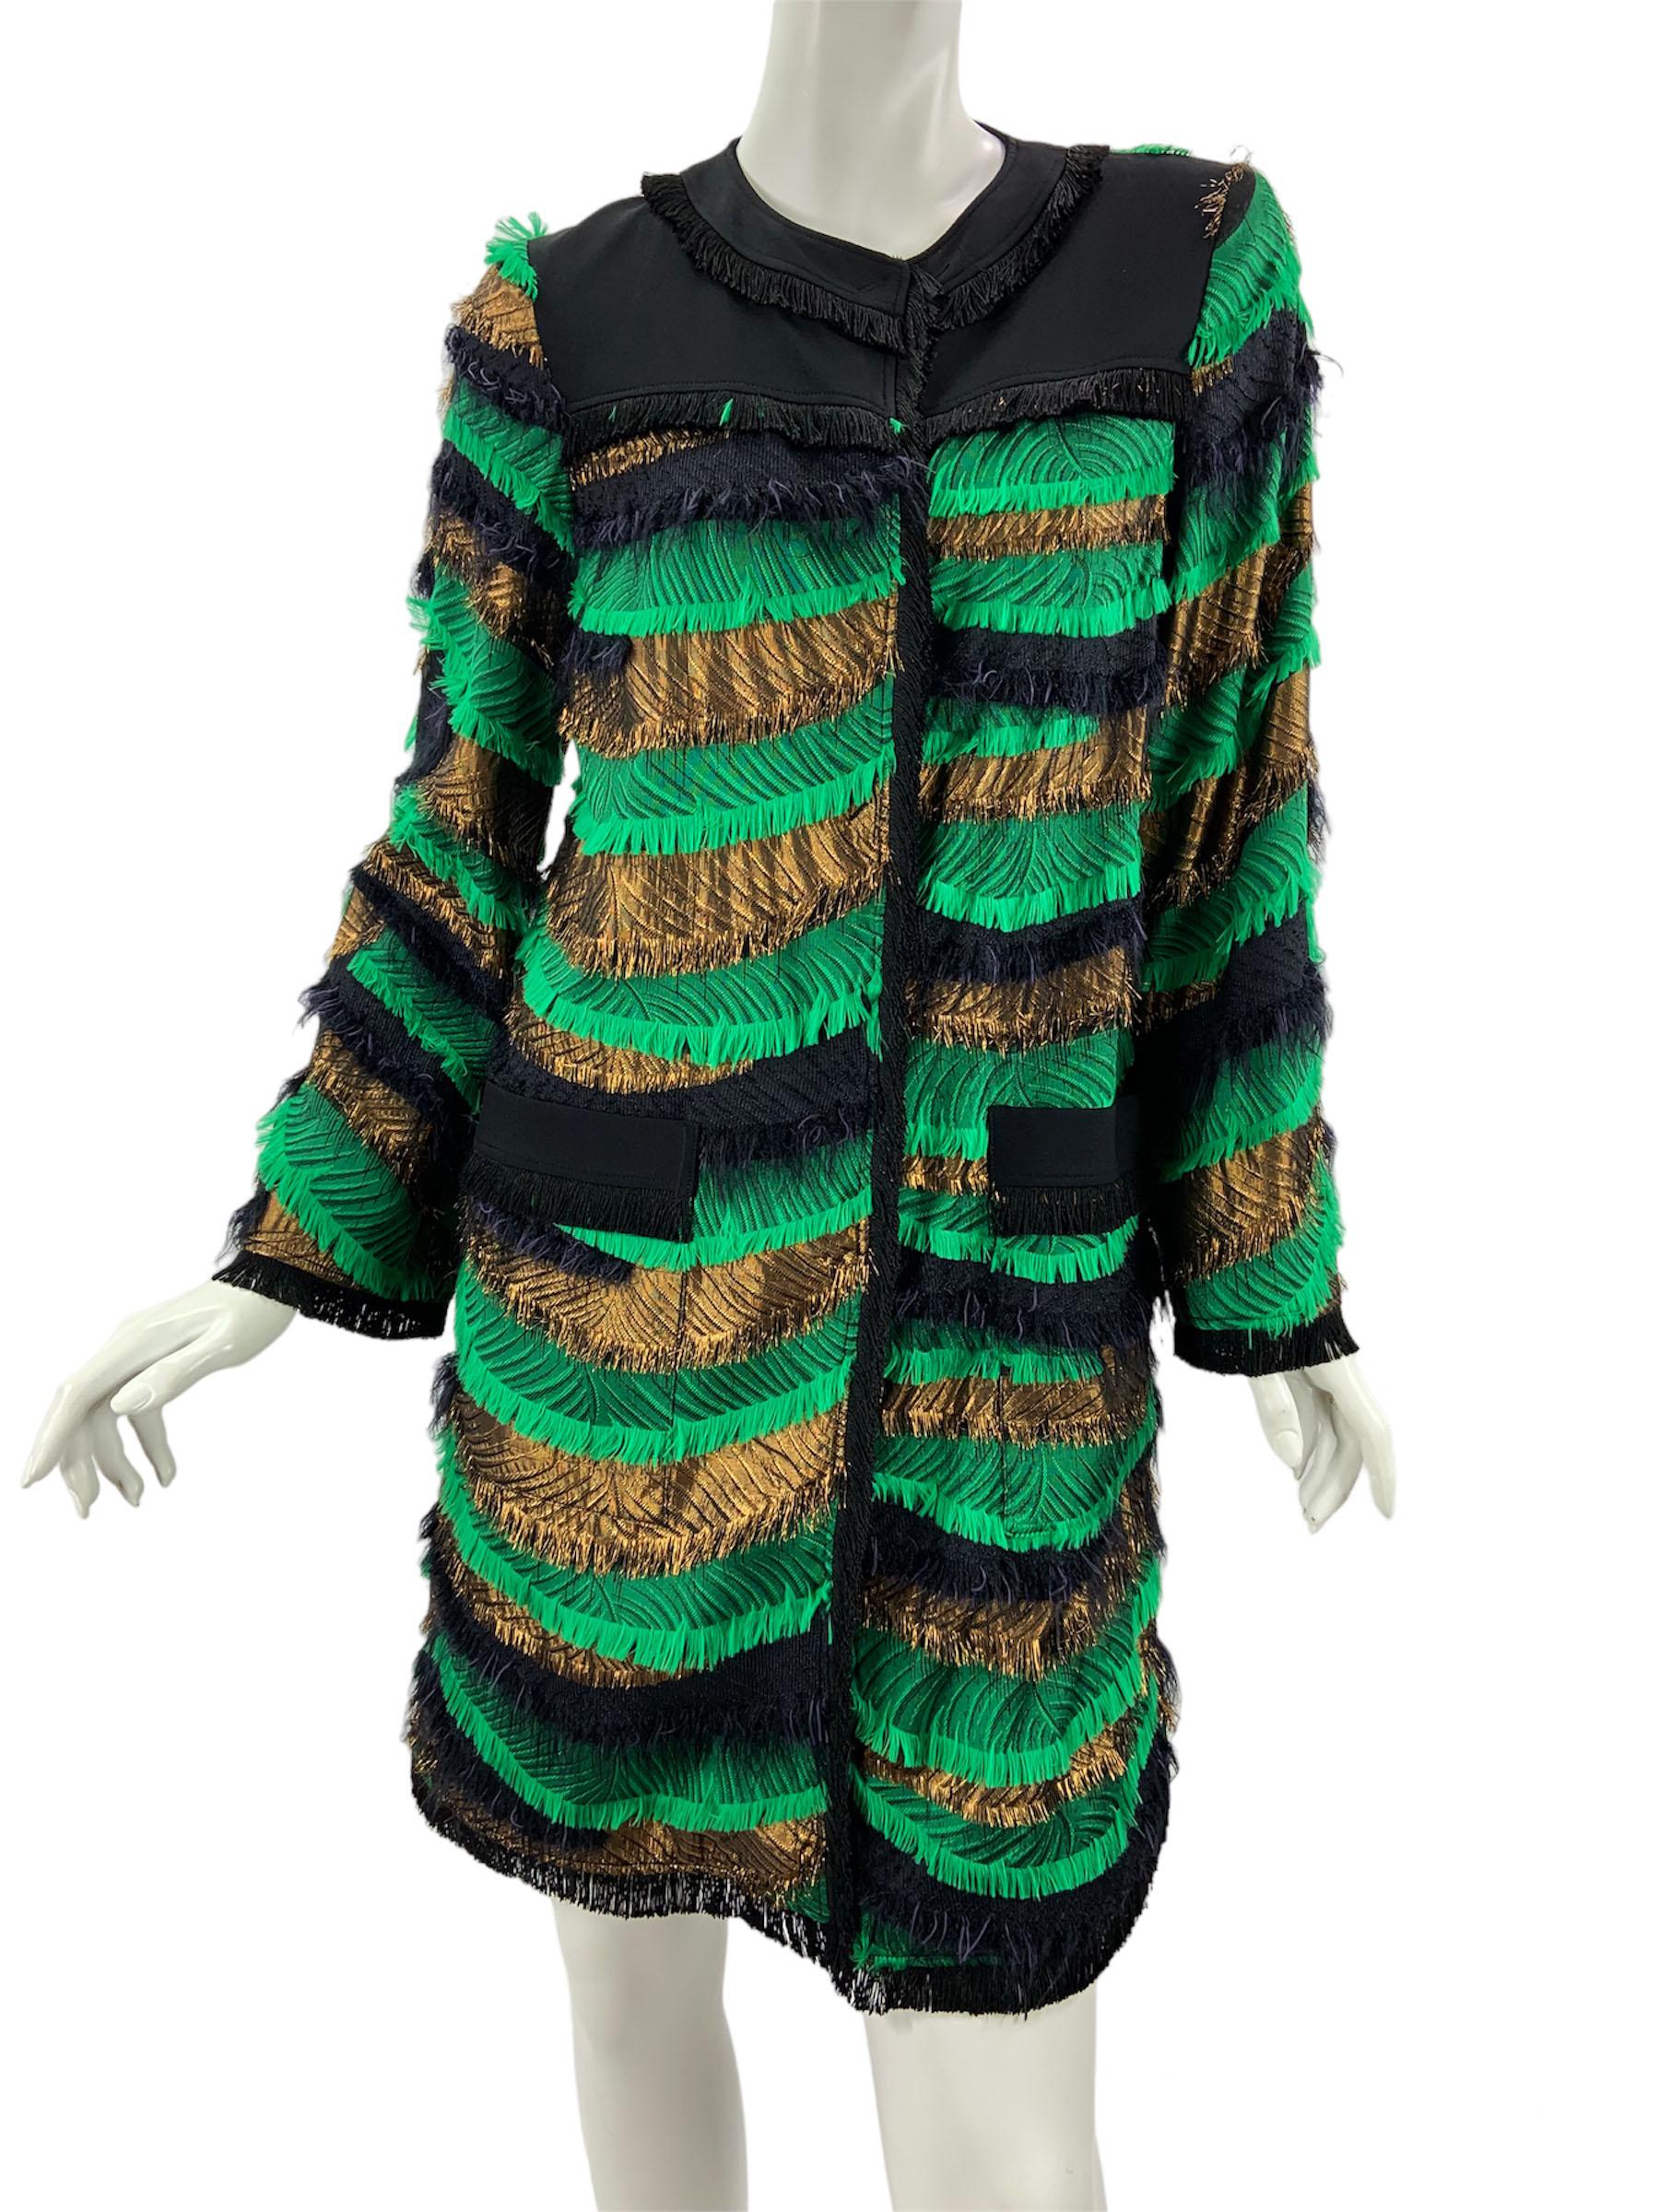 NWT Etro Fringe Layered Silk Cardigan Coat
Italian size 40 - US 4
Main colors - Black, Metallic Bronze, Green. 
Multy Layered, Fringe Finished, Two Front Packets, Snaps Closure, Fully Lined, Light Weight, A-Line Silhouette.
Content: 35% Silk, 35%